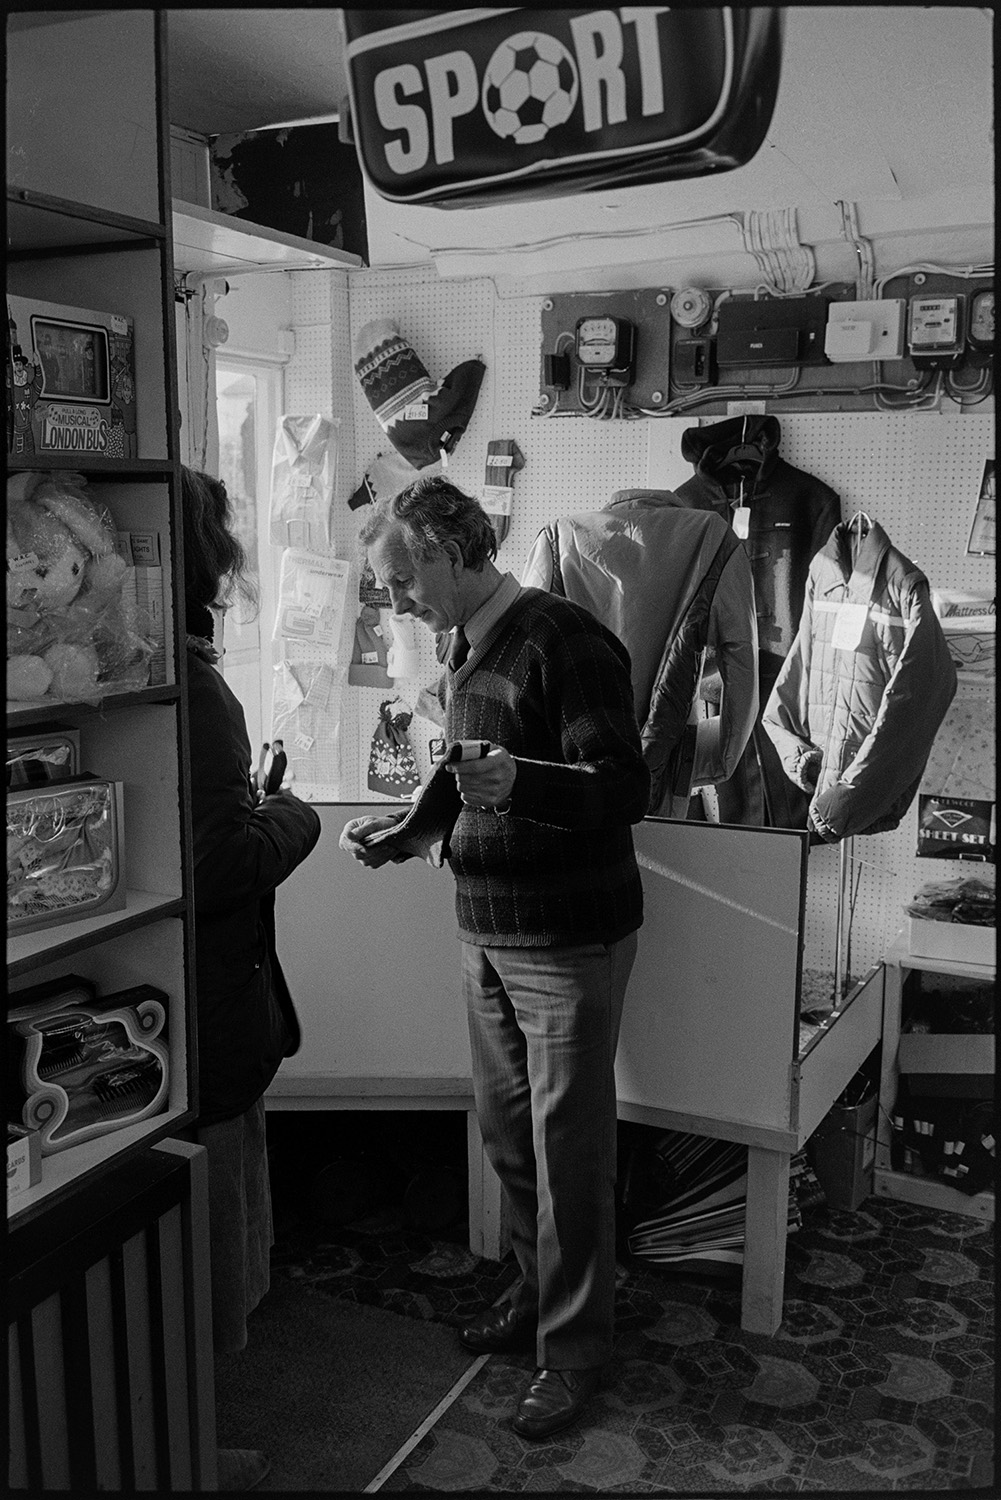 Man selling clothes in shop.<br />
[A man showing a woman a pair of socks at Singh's clothes shop in South Street, Torrington. Shelves with toys and clothes on display, a sports bag, and a counter can be seen inside the shop. An electricity meter is visible on the wall behind the counter.]